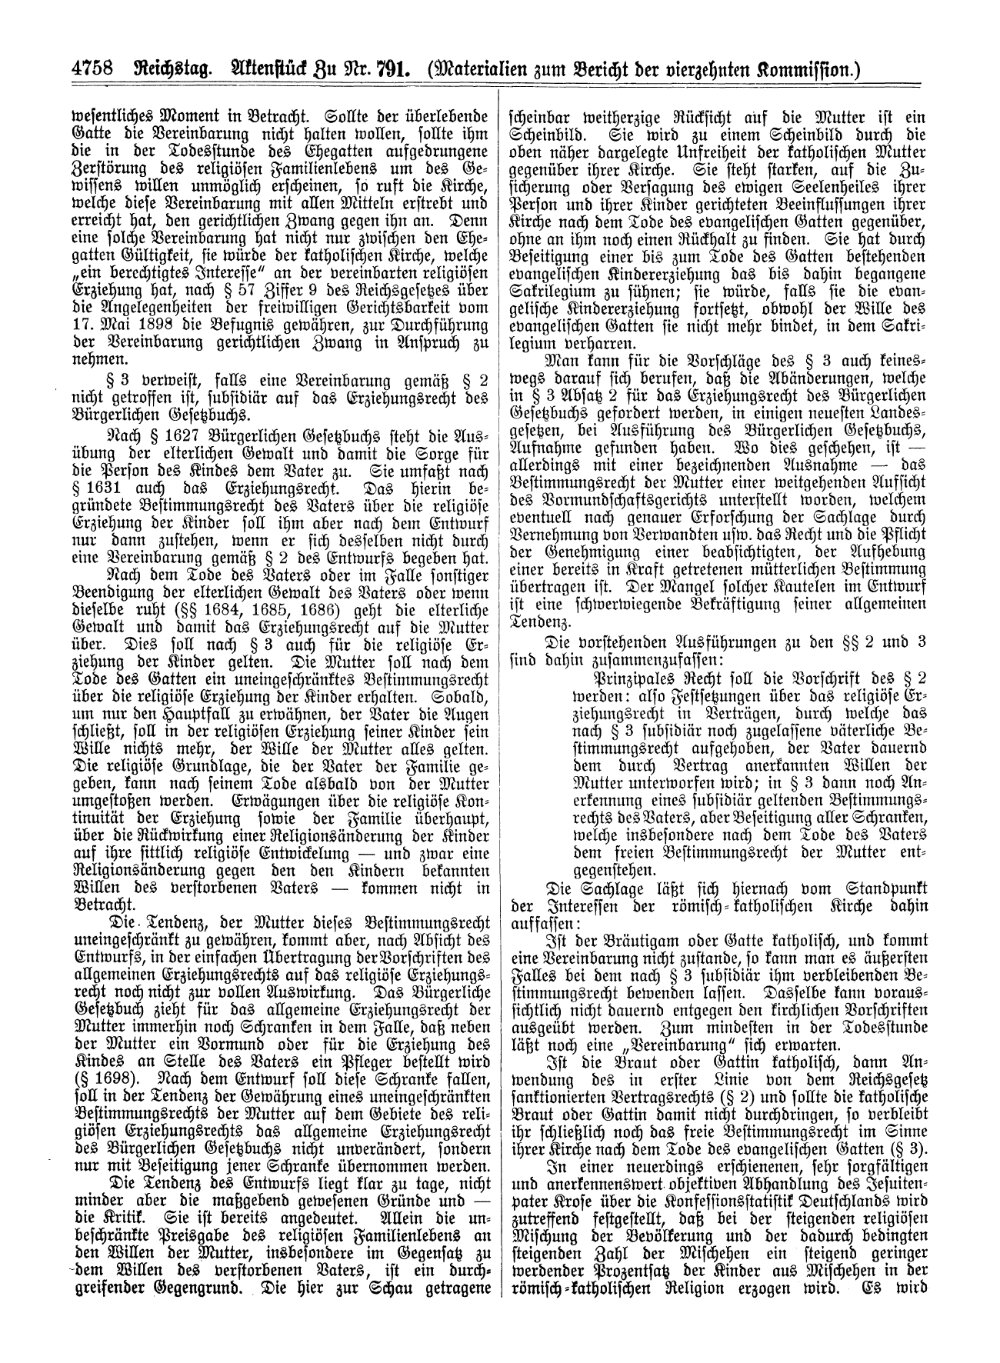 Scan of page 4758